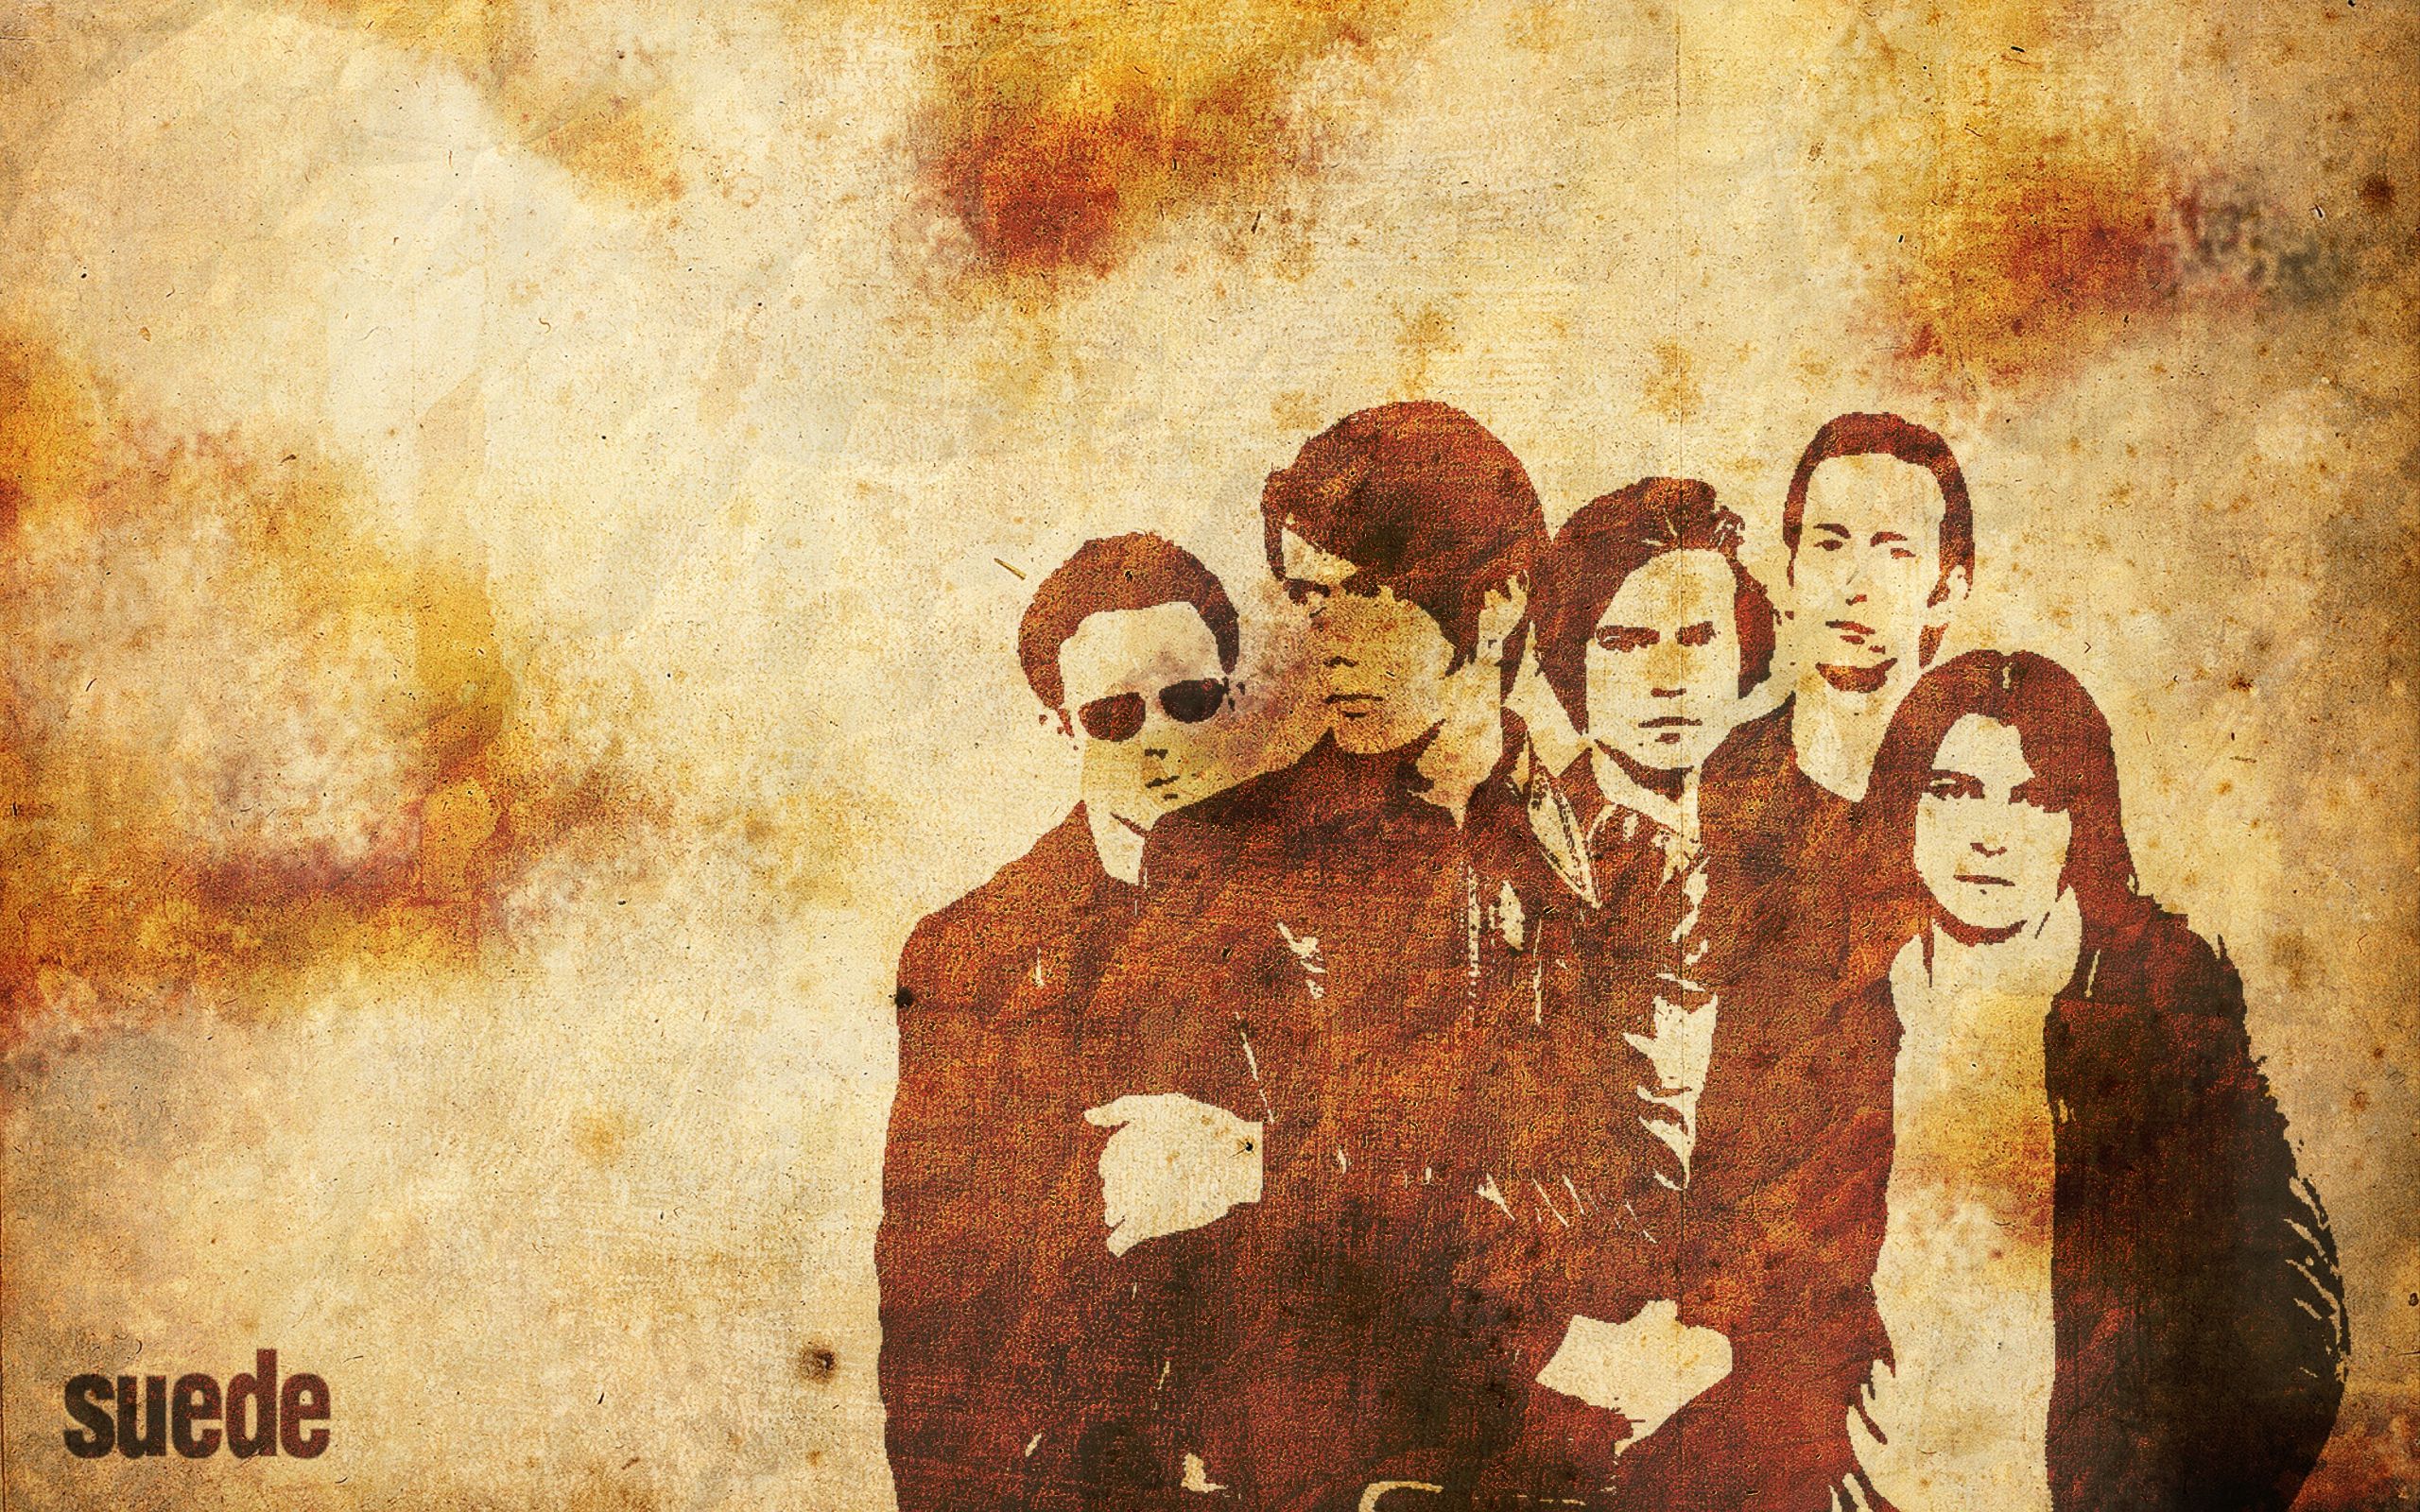 Suede Band Wallpapers - Wallpaper Cave